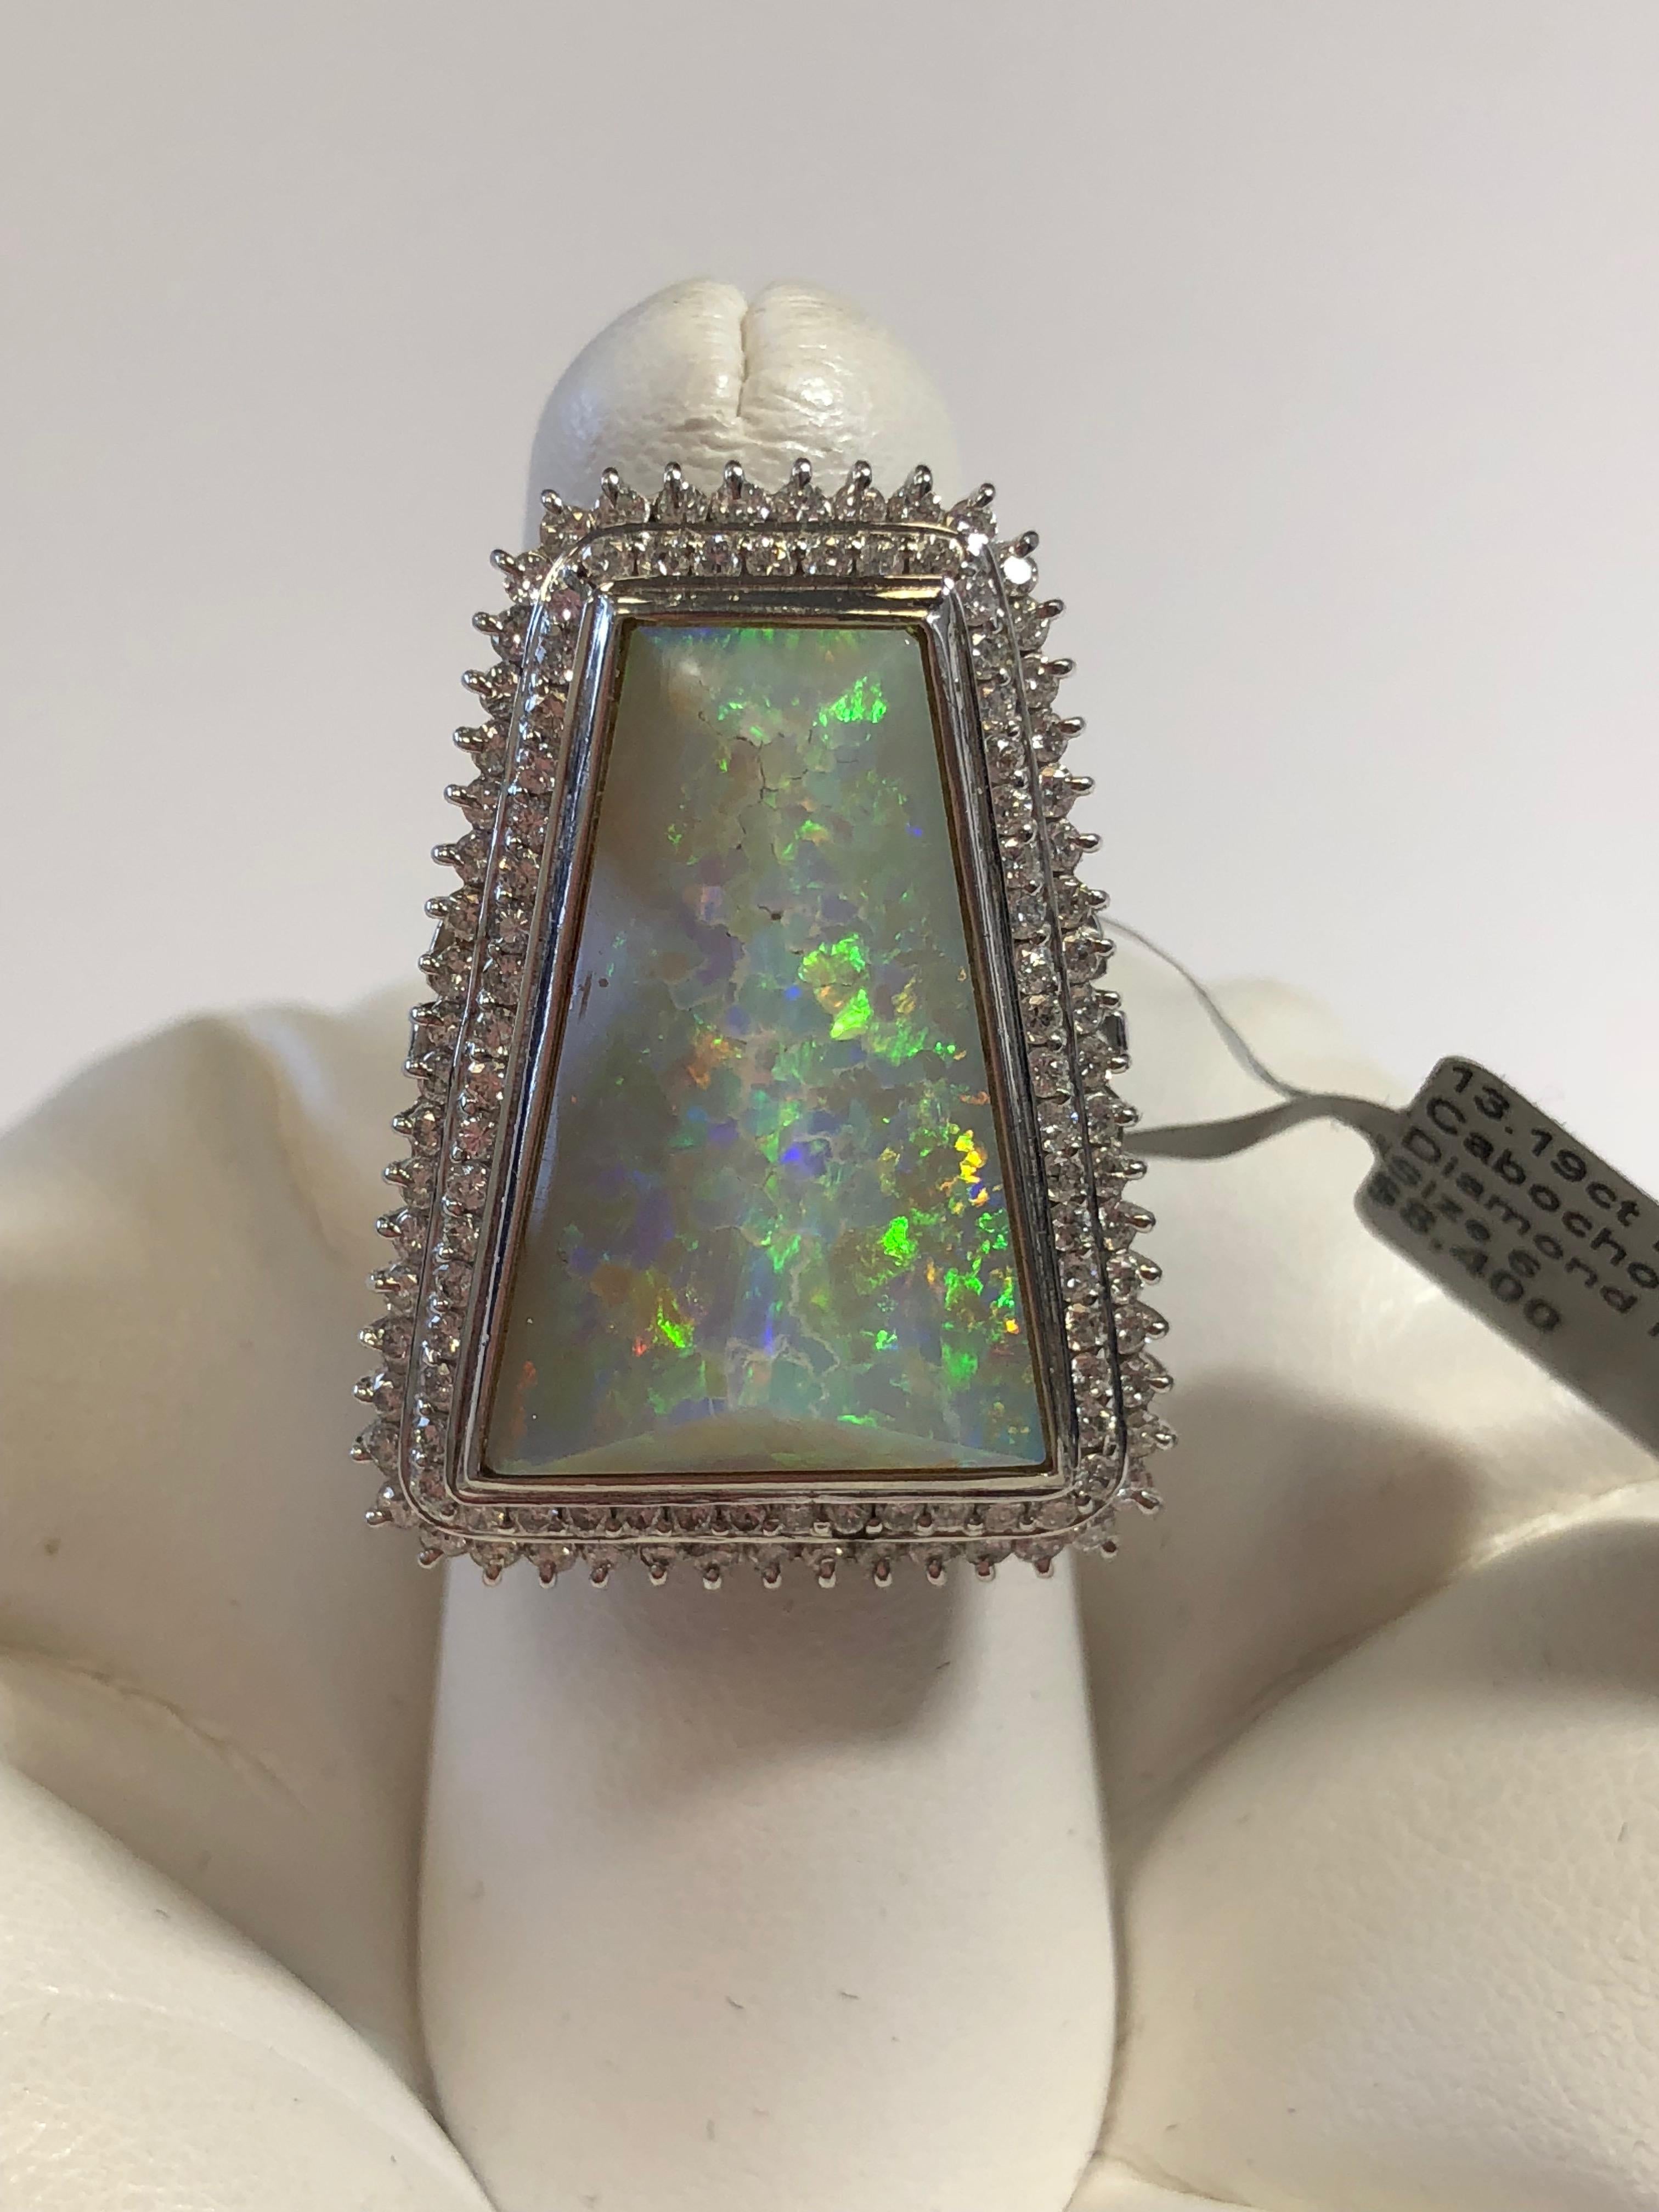 Stunning 13.19 carat multicolor opal cabochon in a very unique cut.  It has a  white background with sparks of green, orange, purple and yellow.  Surrounded by 1.30 carats of white diamonds in a beautiful size 6 platinum mounting.  A great cocktail